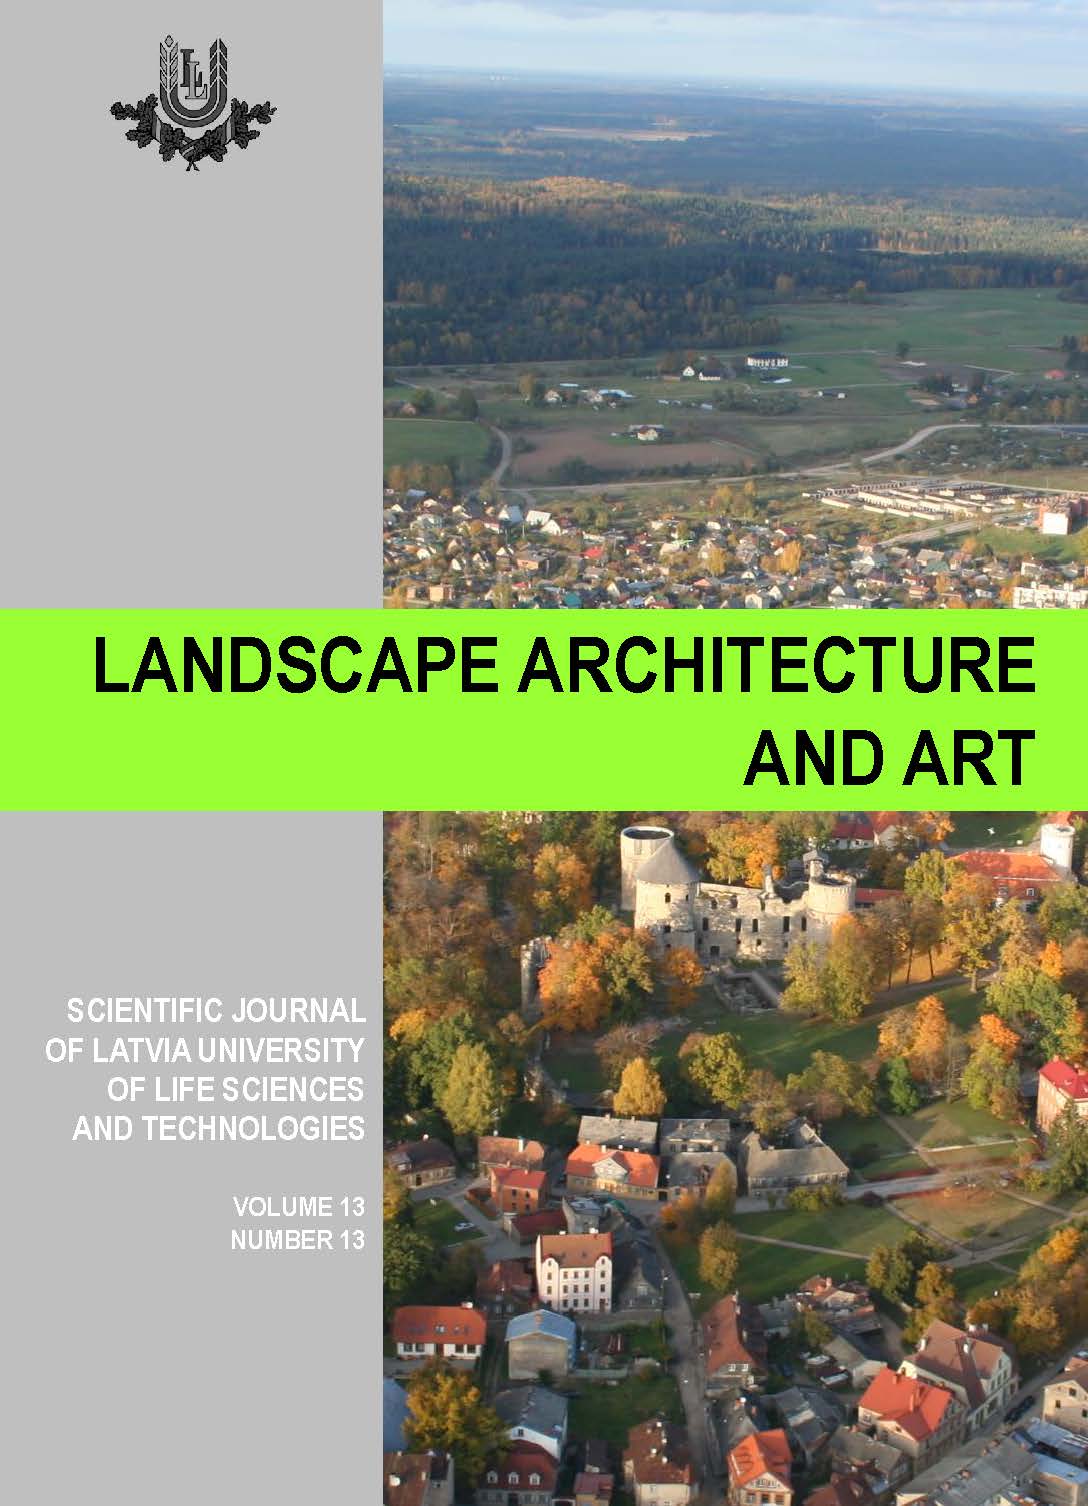 Landscape Architecture and Art, Volume 13, Number 13